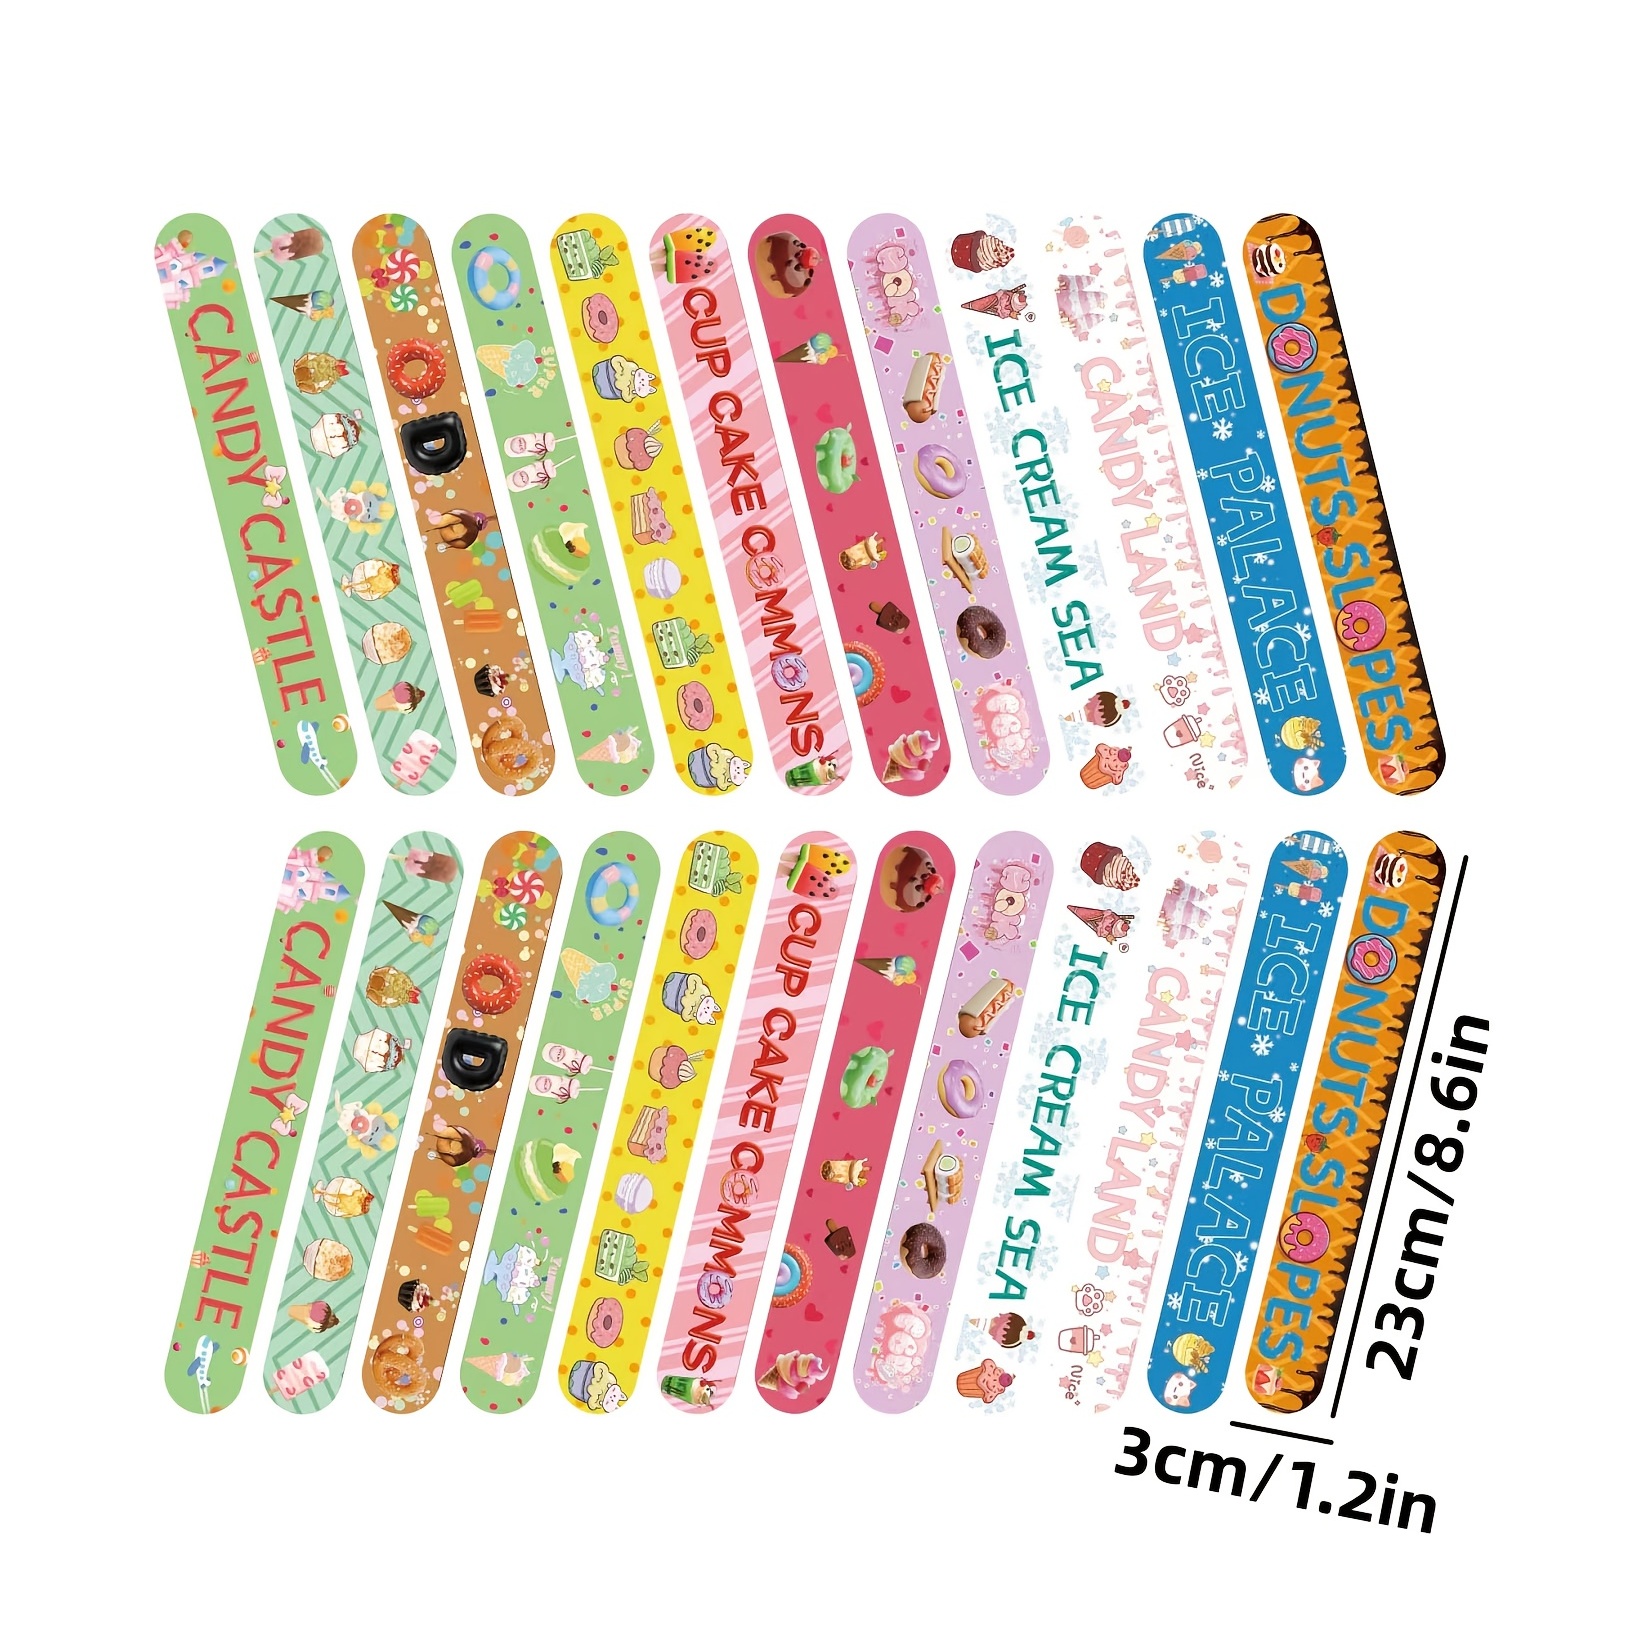 100 PCS Slap Bracelets Party Favors with Colorful Hearts Animal Print  Design Retro Slap Bands for Kids Adults Birthday Classroom Gifts (100PCS)